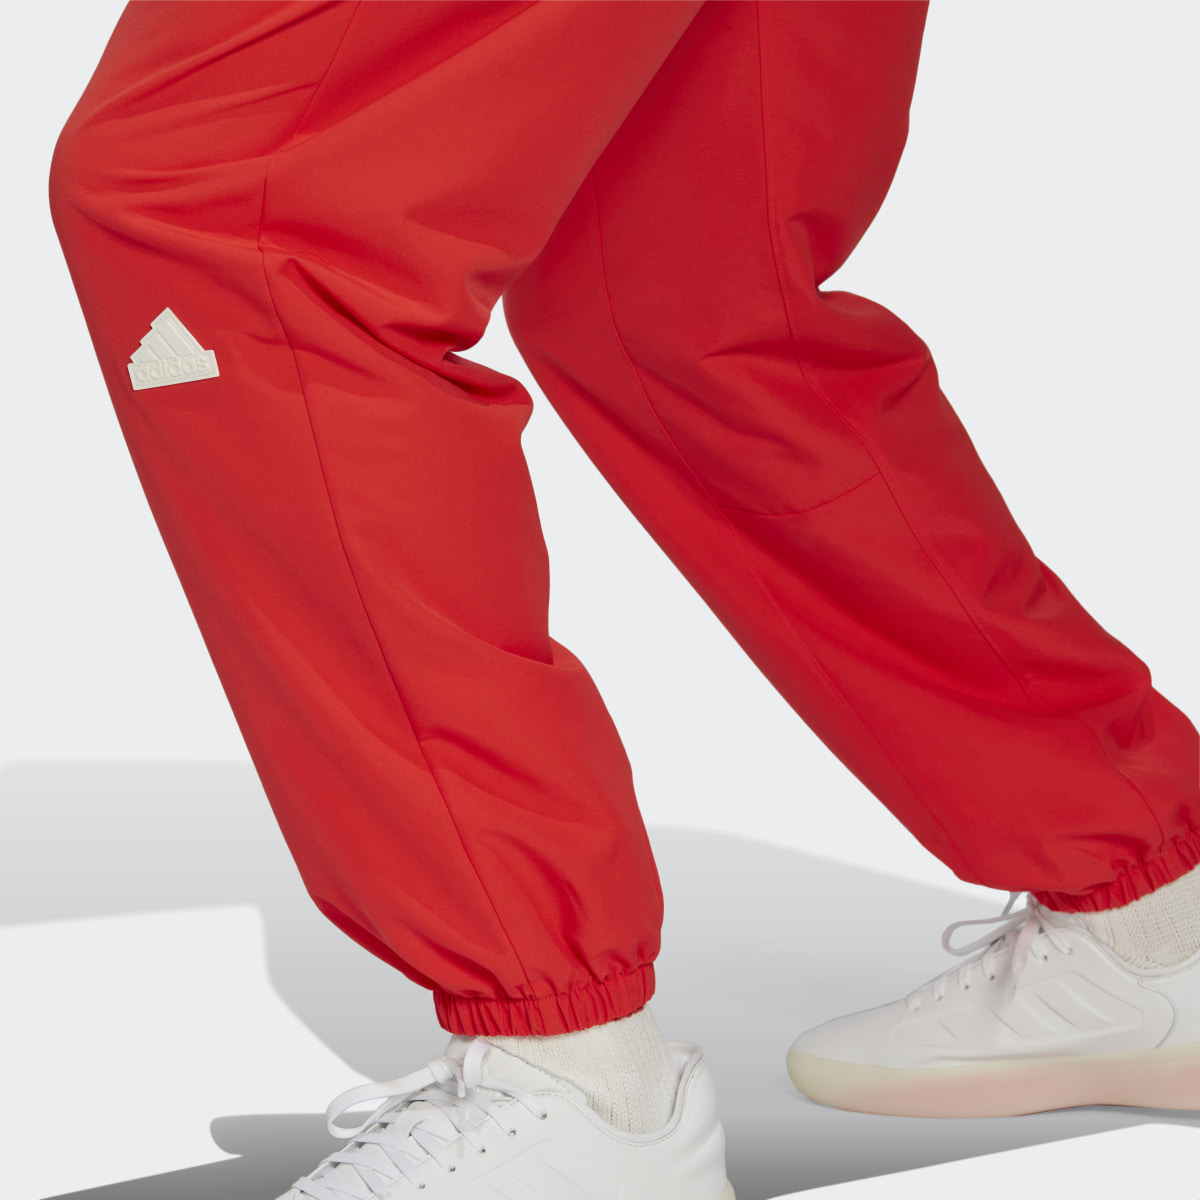 Adidas Woven Tracksuit Bottoms - HG2068